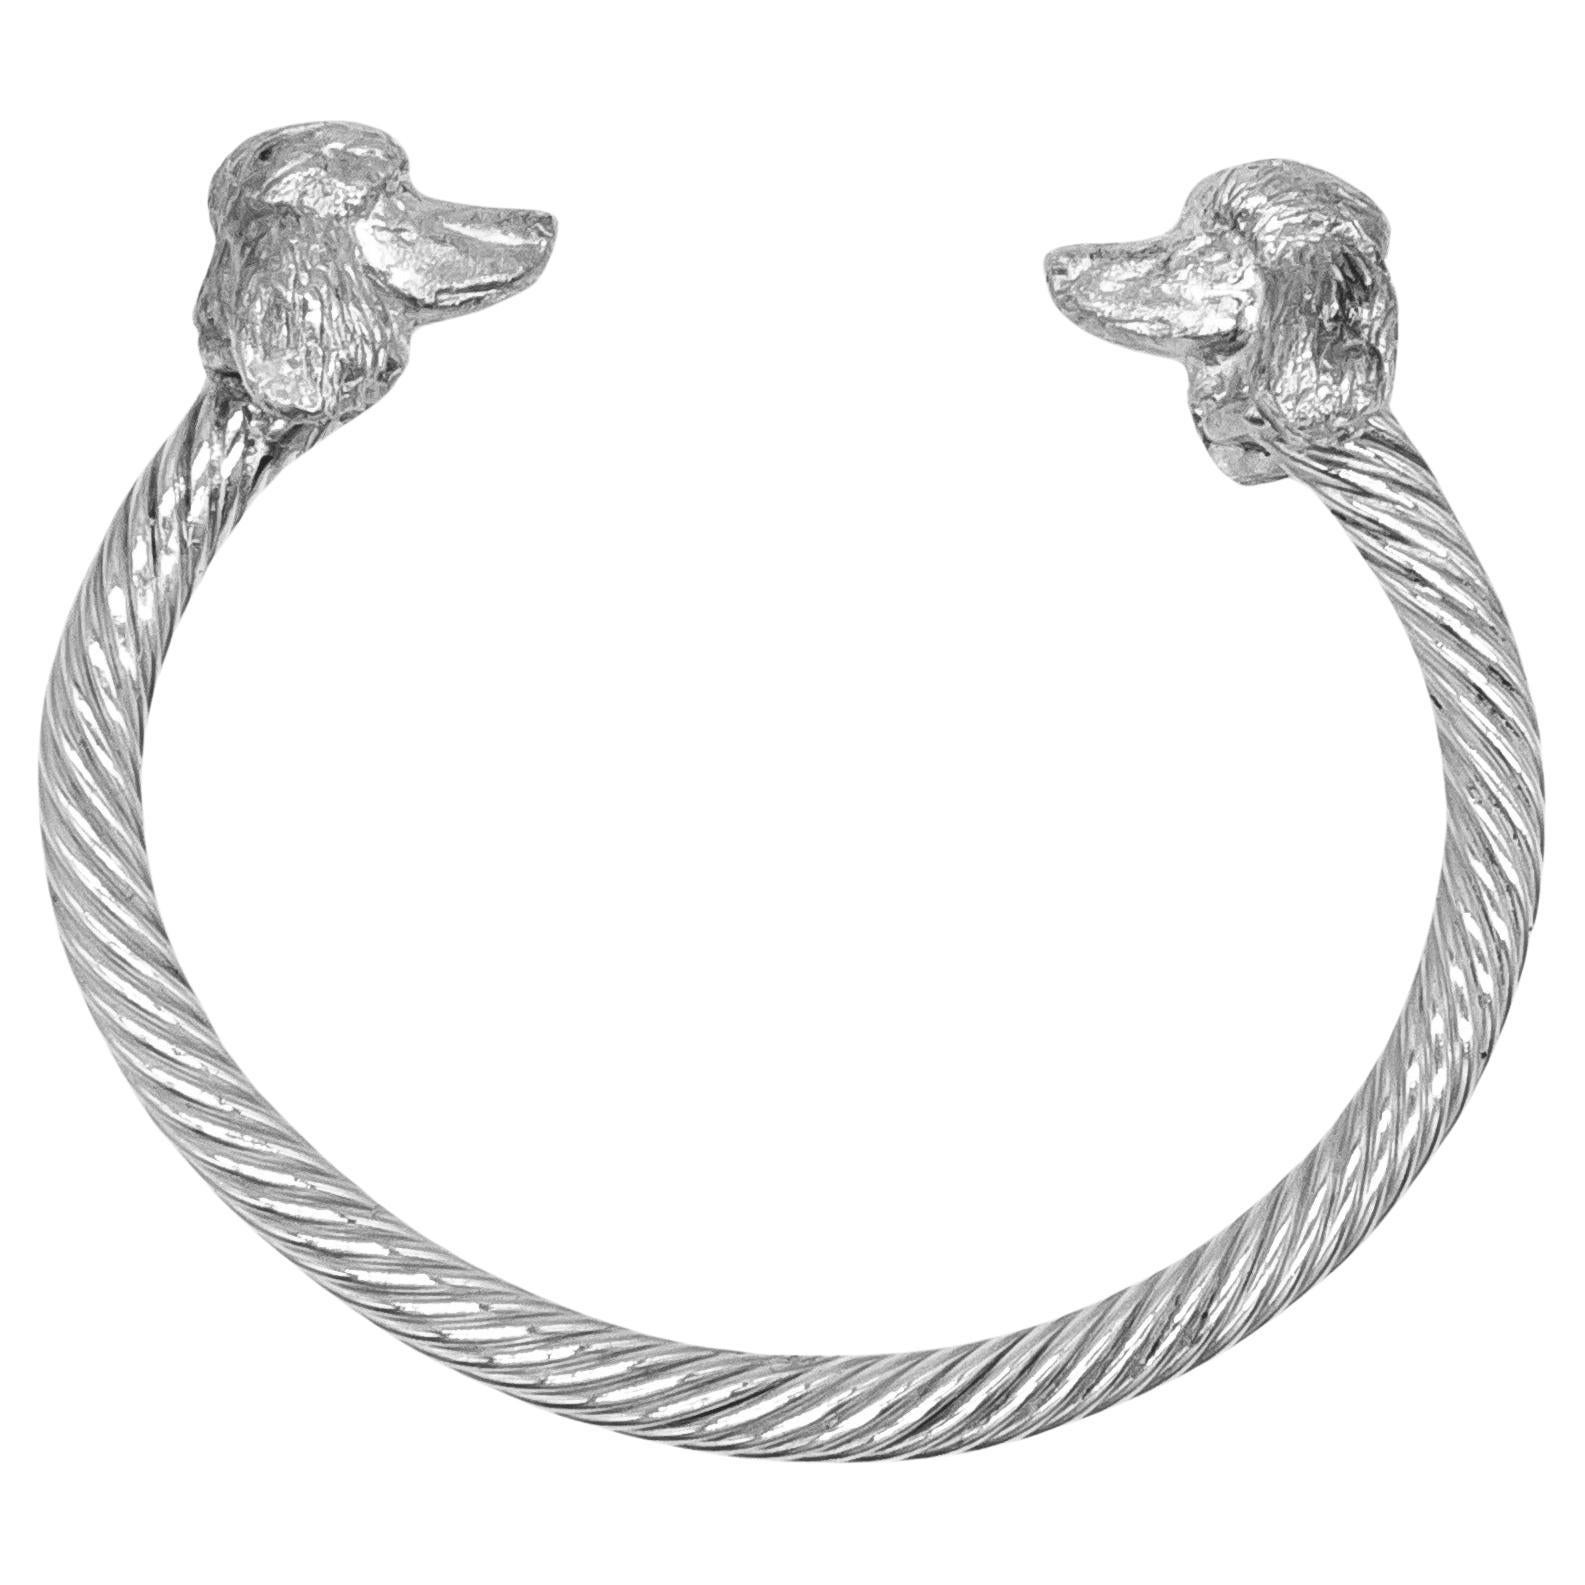 Paul Eaton Sculpted Miniature Poodle Dog Heads on Sterling Silver Twisted Bangle For Sale